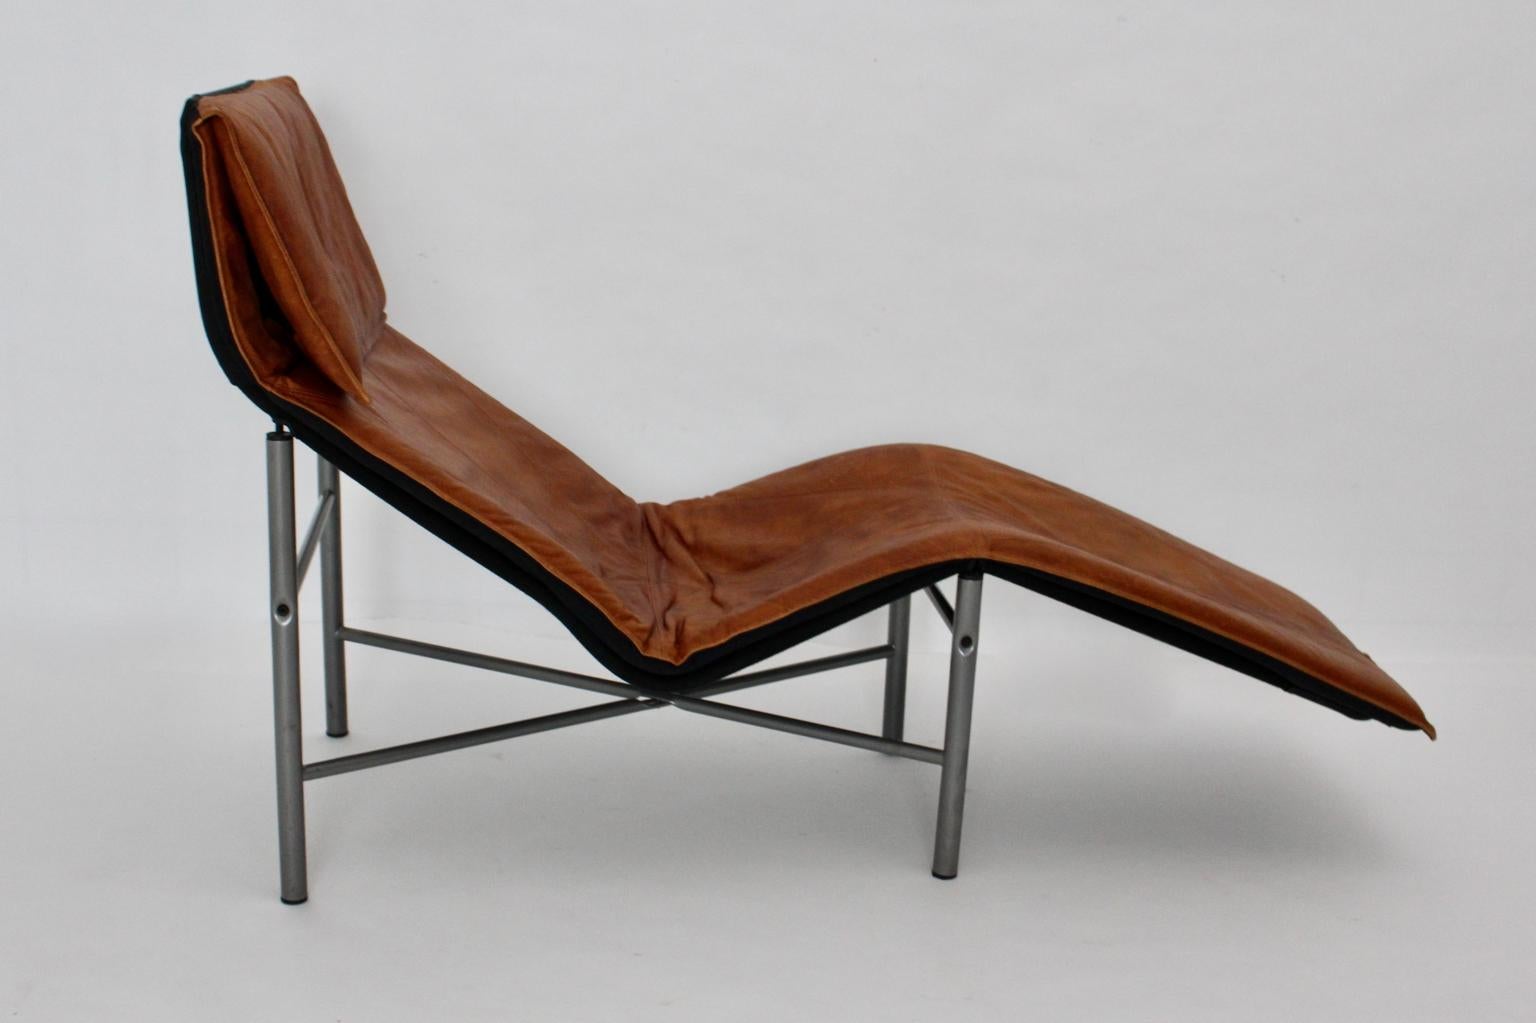 Leather Vintage Chaise Longue by Tord Bjorklund Sweden, 1970s (Metall)